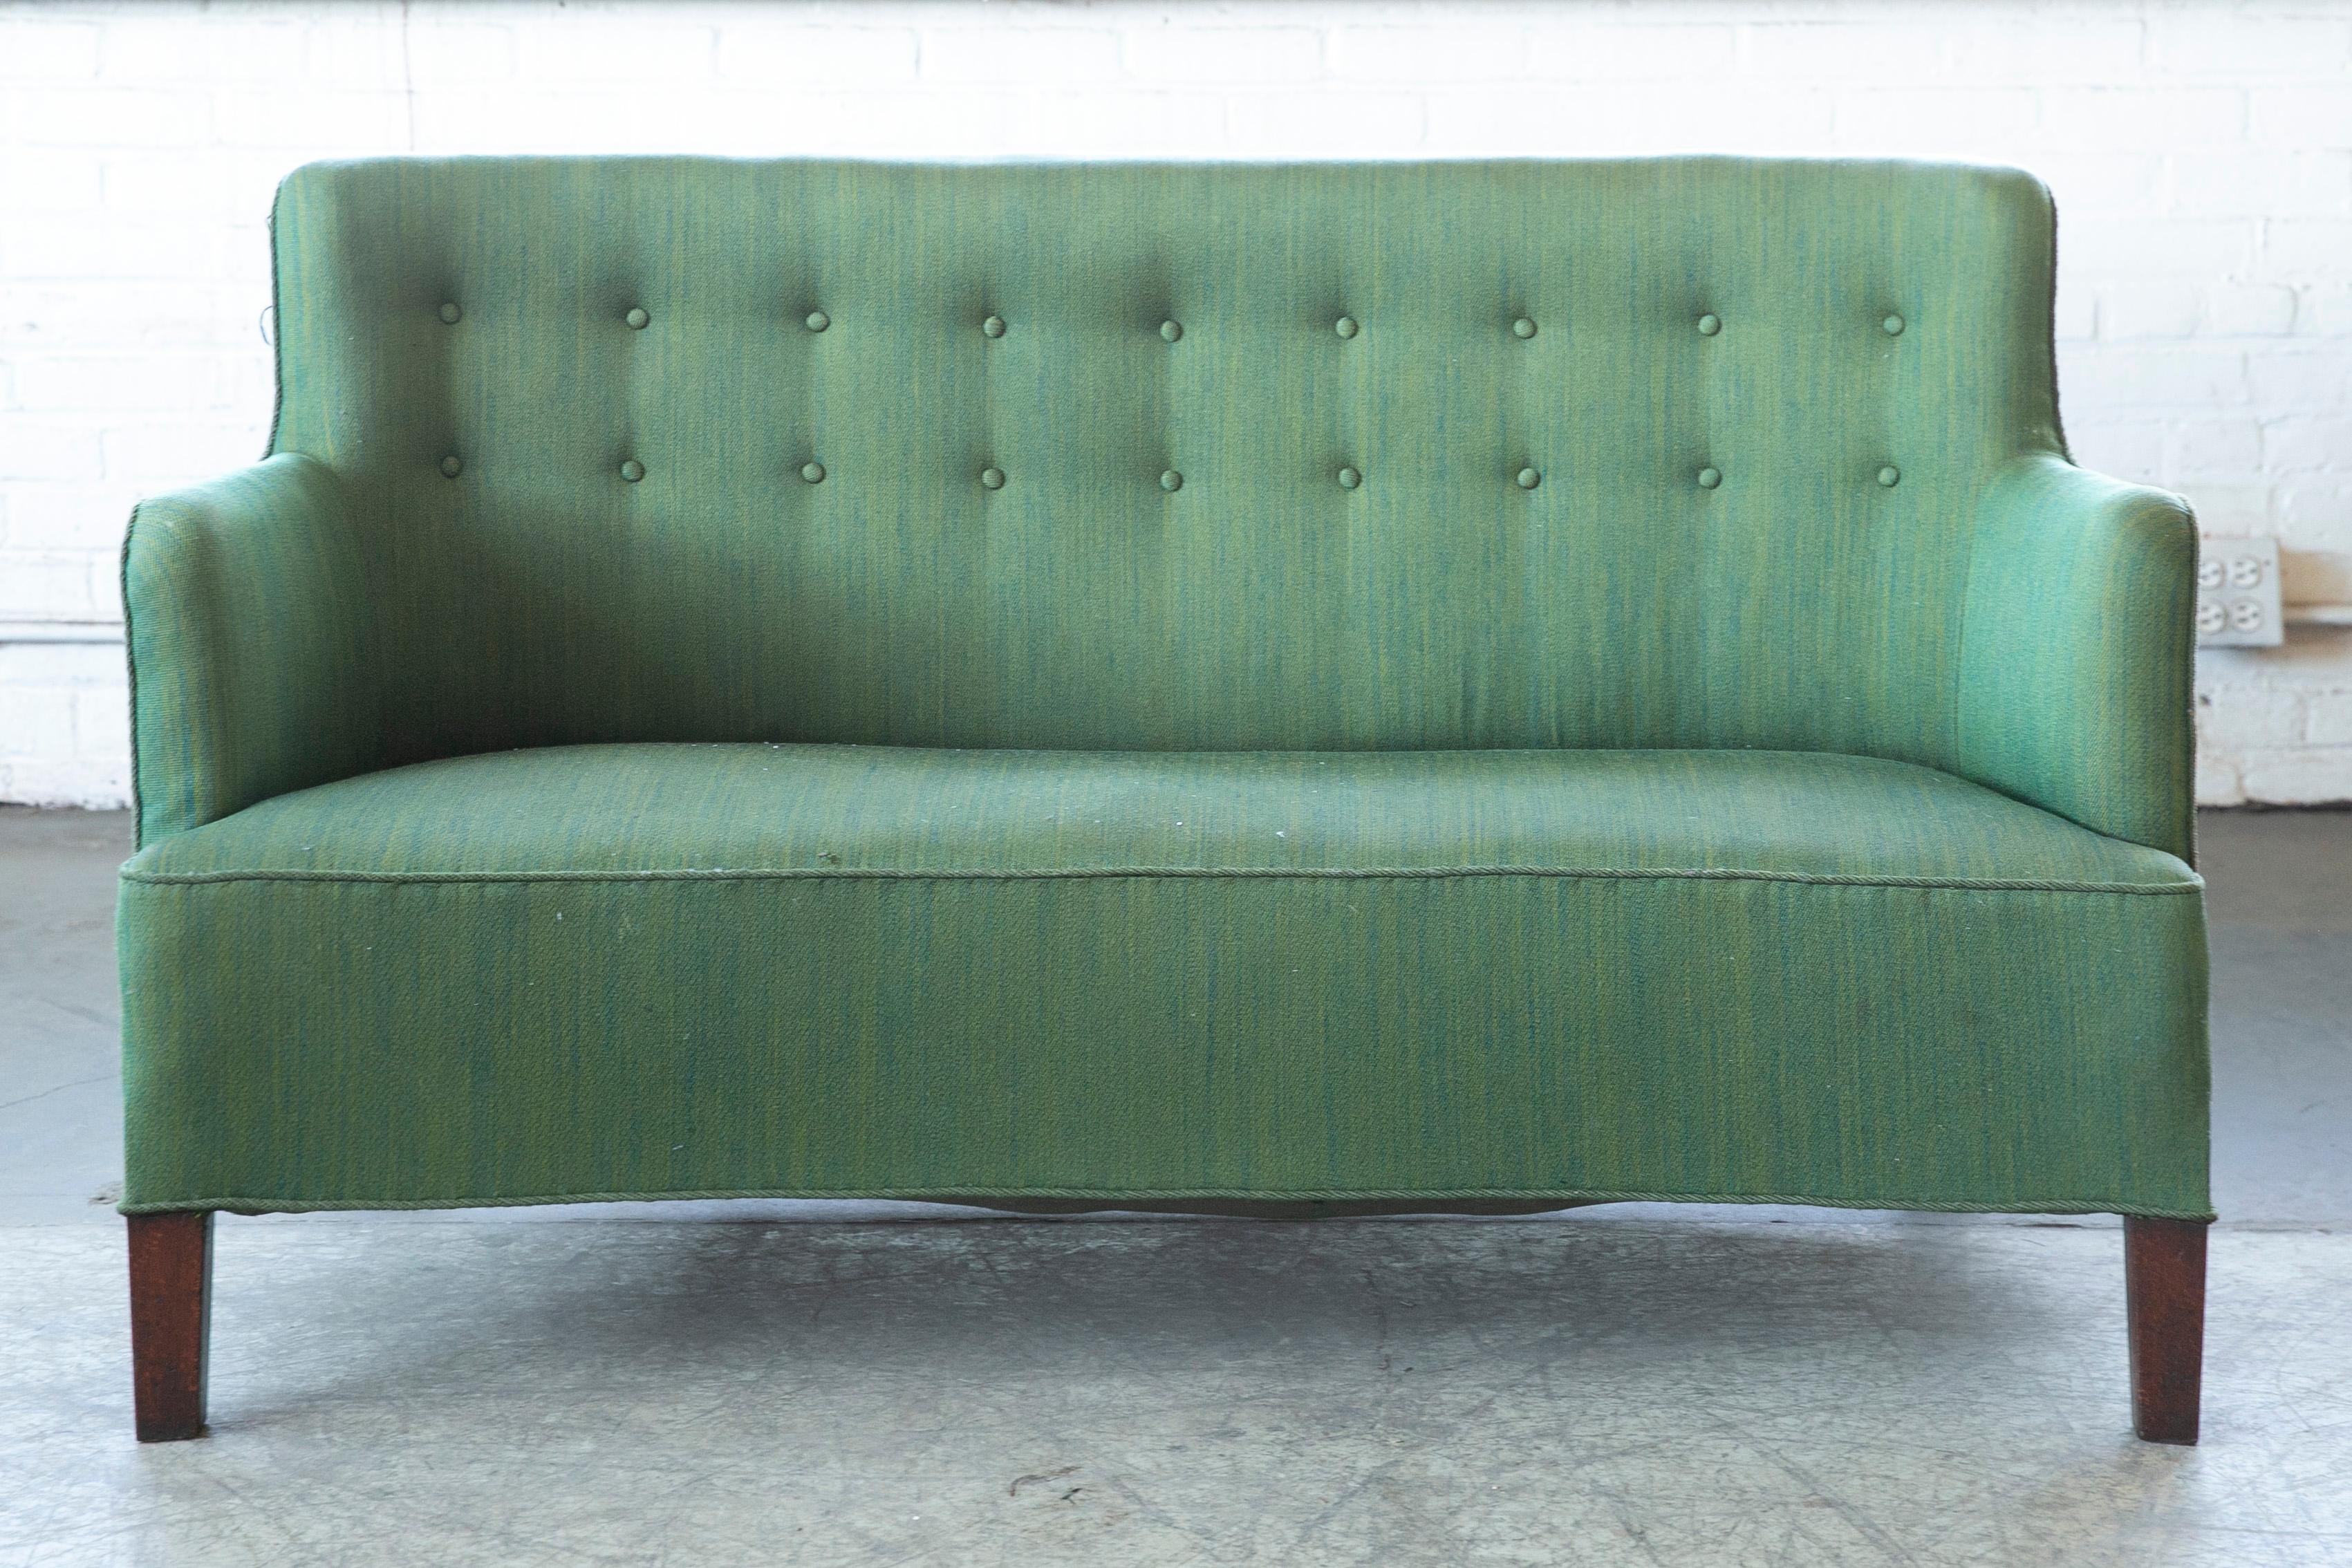 Very elegant small sofa or settee made around 1940 around Copenhagen, Denmark. it is very much in the style of Master Carpenter Georg Kofoed but Designer and maker is unknown to us. Beautiful curved shape with a short backrest and high armrests